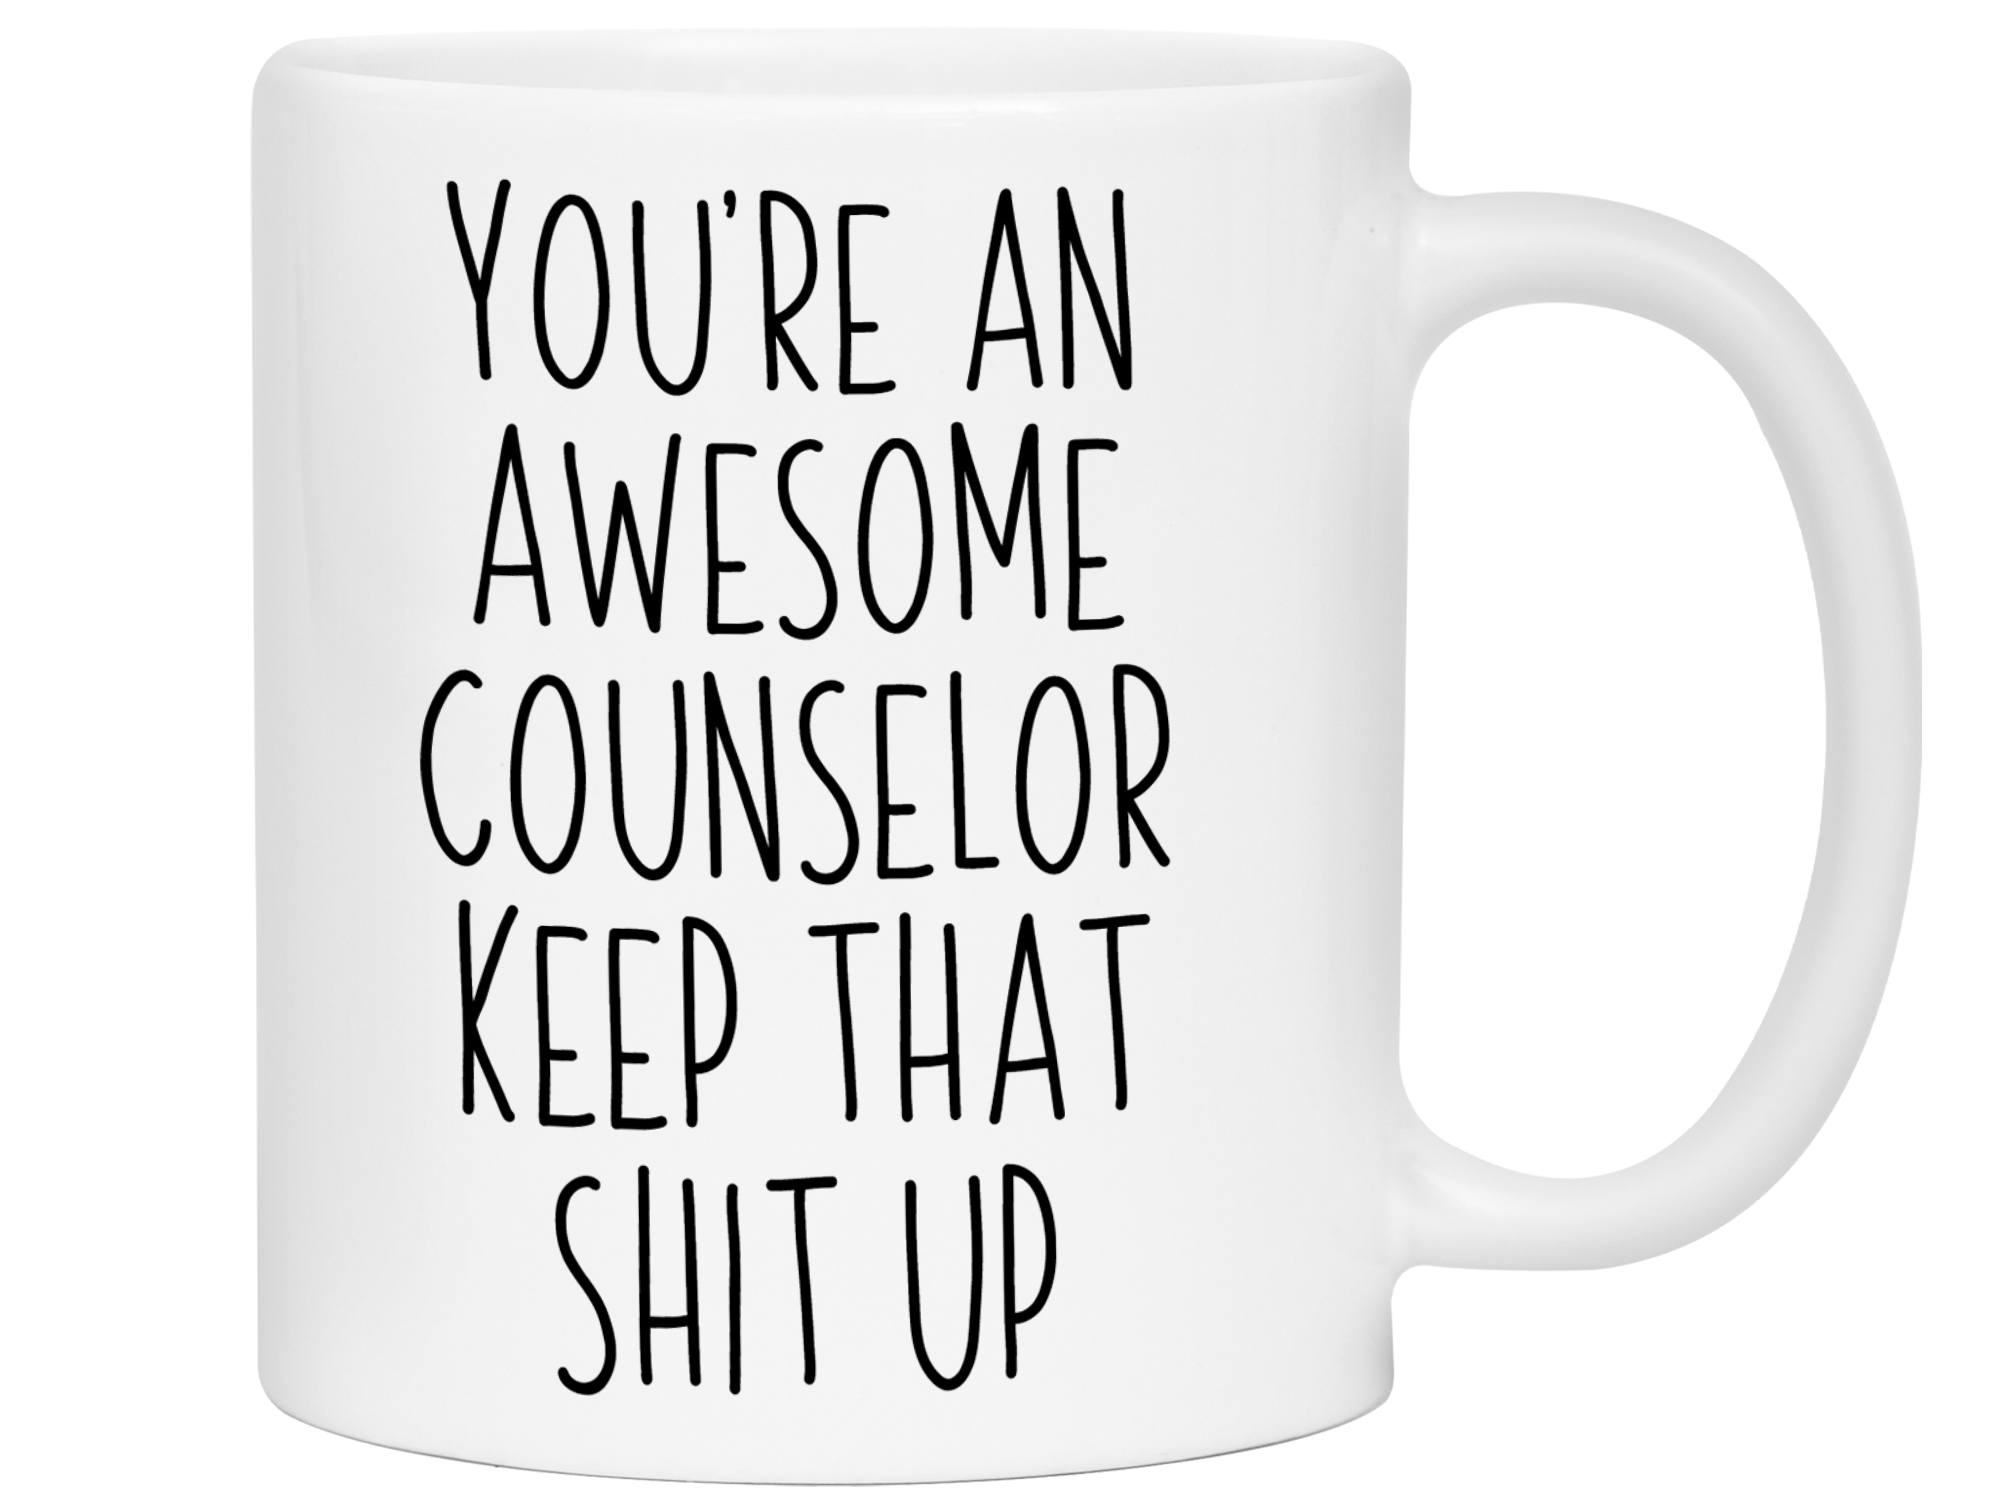 Gifts for Counselors - You're an Awesome Counselor Keep That Shit Up Coffee Mug